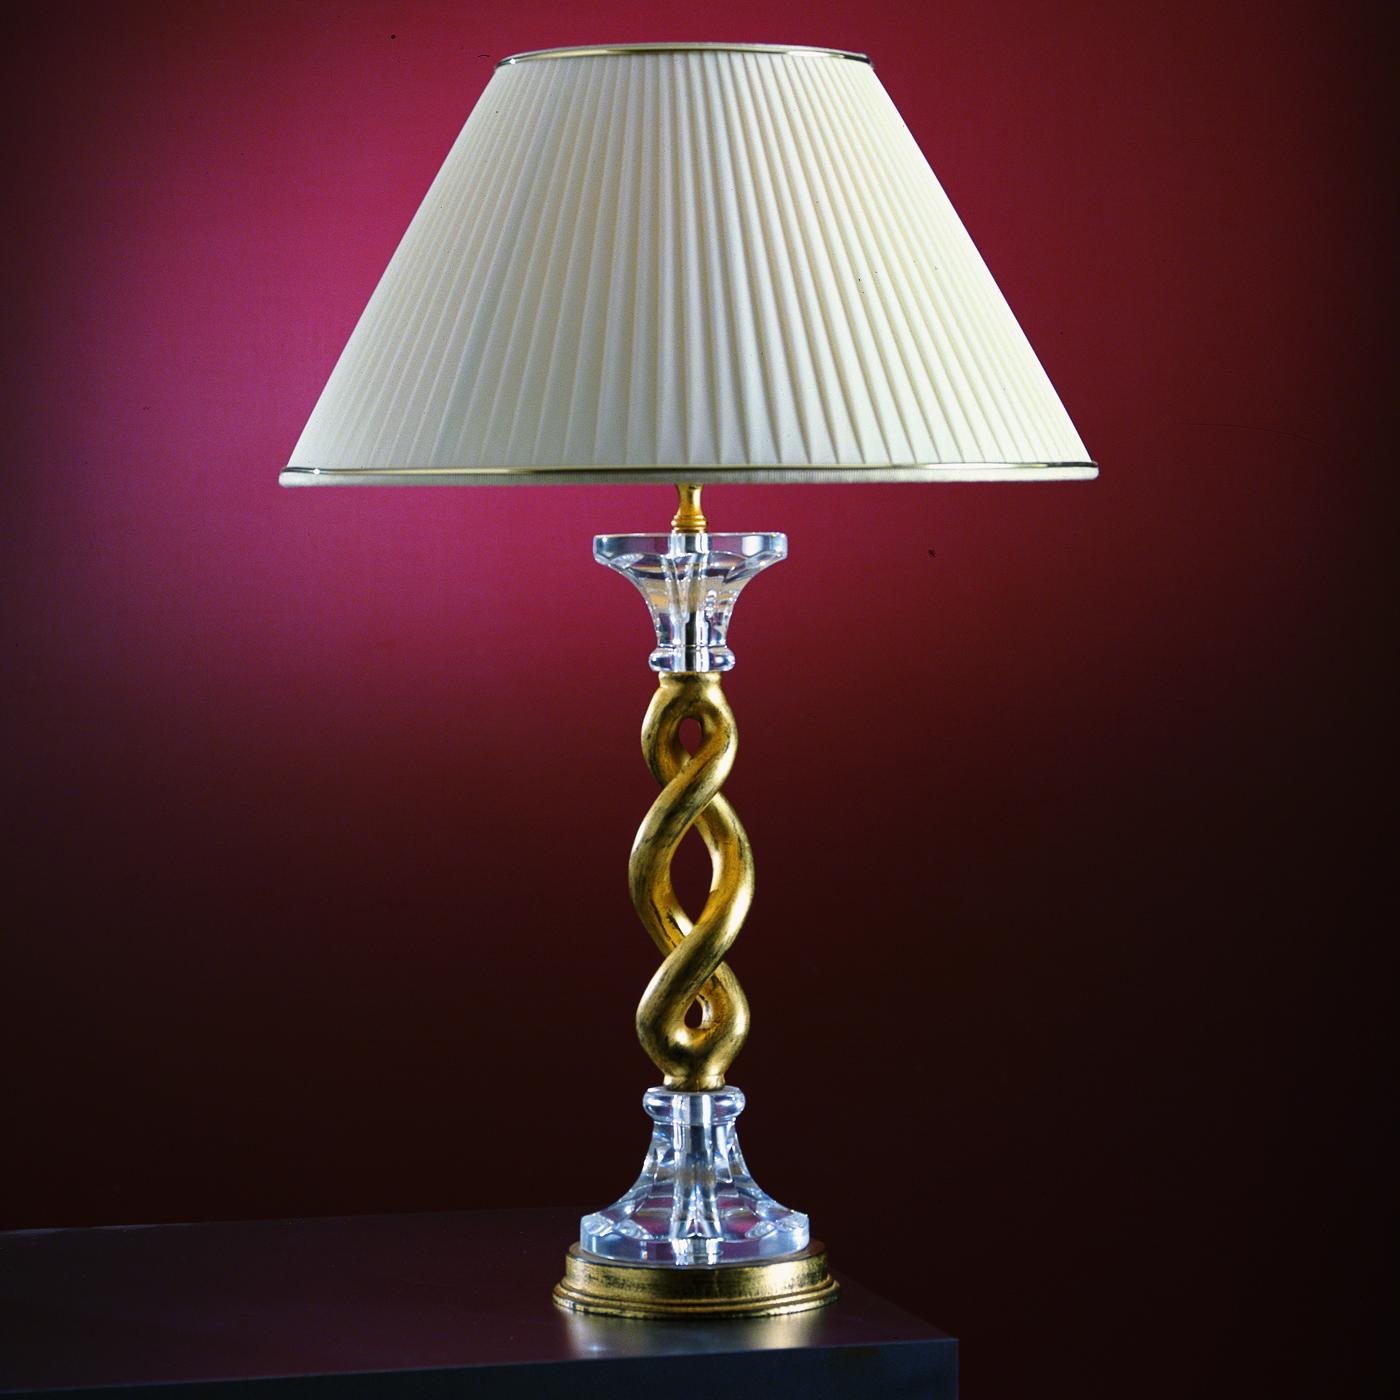 The refined and timeless style of this table lamp will provide a captivating decorative accent while casting a sophisticated ambient light in any midcentury and classic interior. Available also as a floor lamp, the sinuous silhouette fashioned of